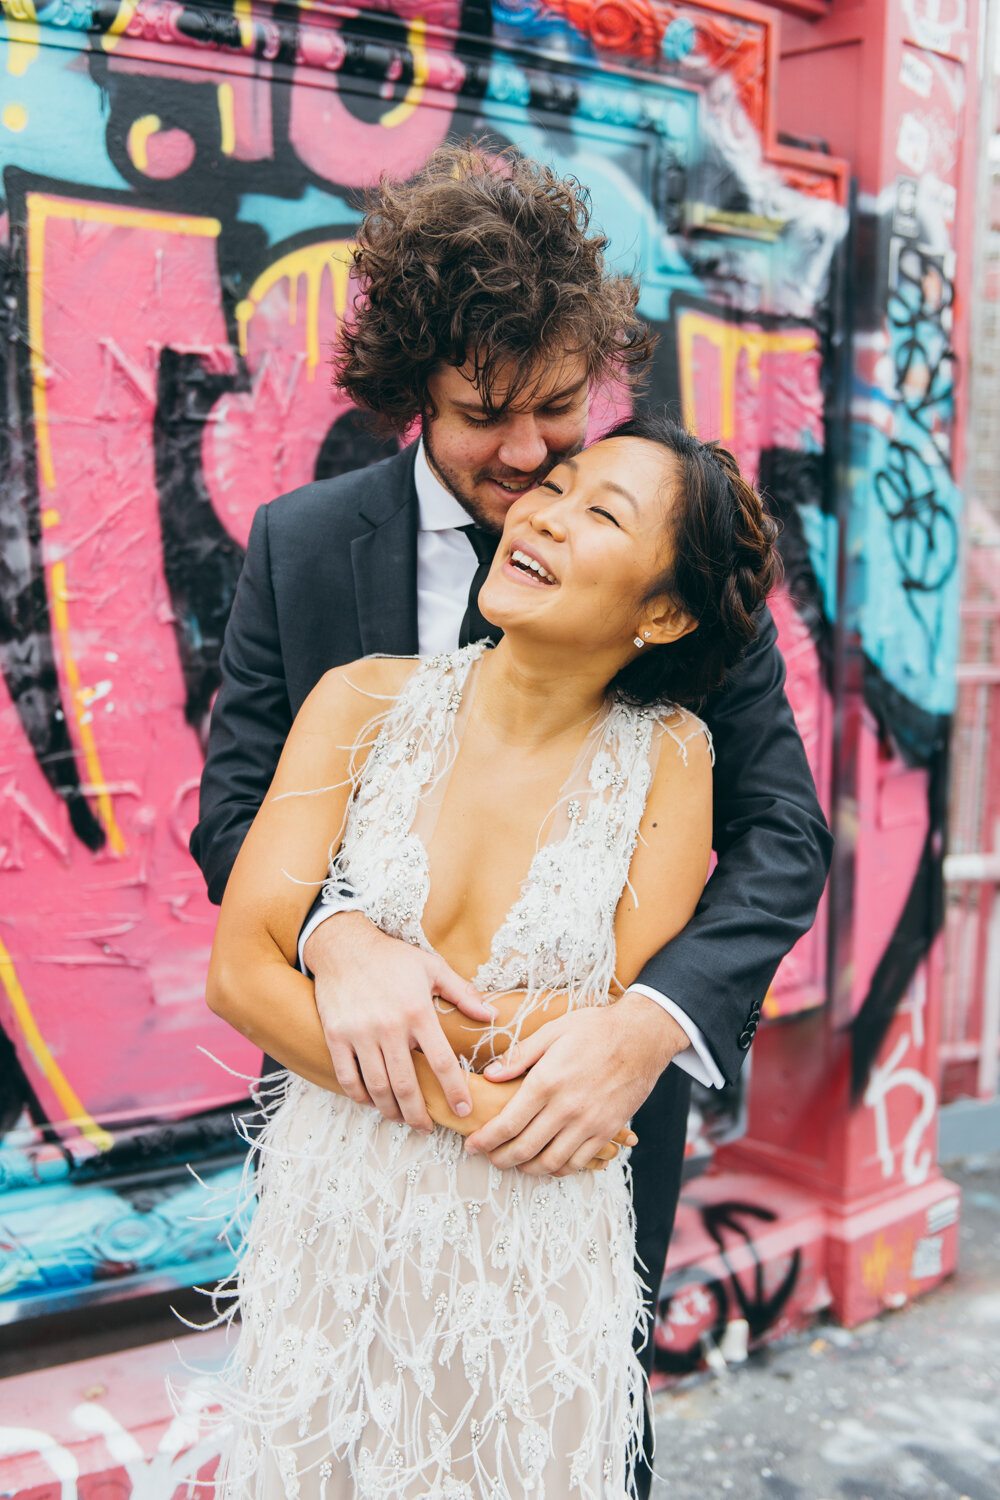 Groom stands behind he bride and he has his arms around her. They are both smiling. A wall of graffiti is behind them on the Williamsburg Bridge.

Central Park Wedding Photography. Williamsburg Bridge Bridal Portraits. Luxury NYC Wedding Photographer. Manhattan Micro Wedding.